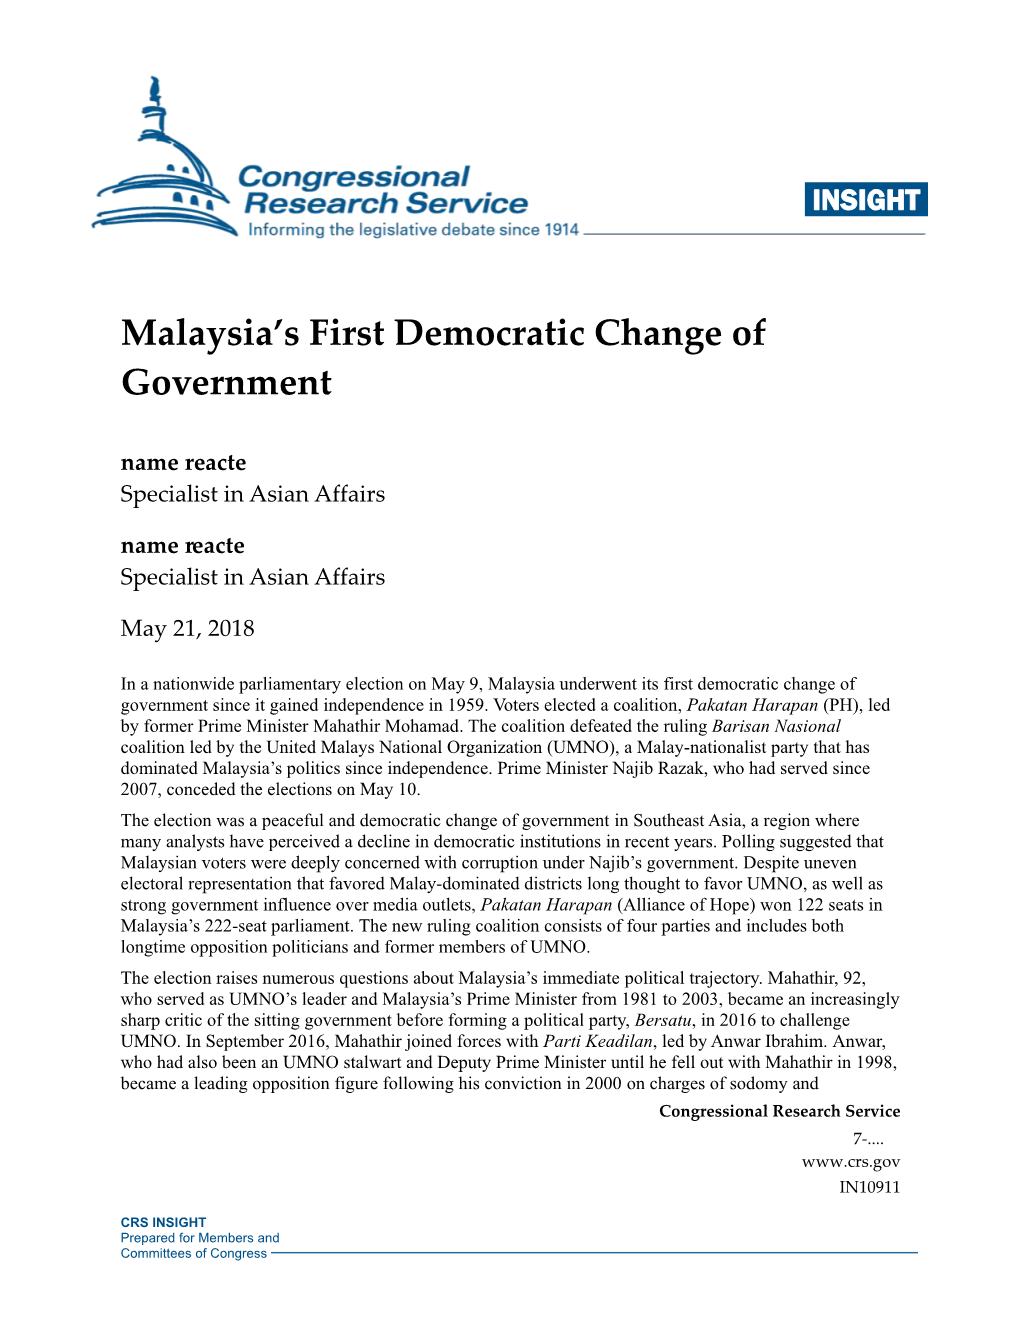 Malaysia's First Democratic Change of Government